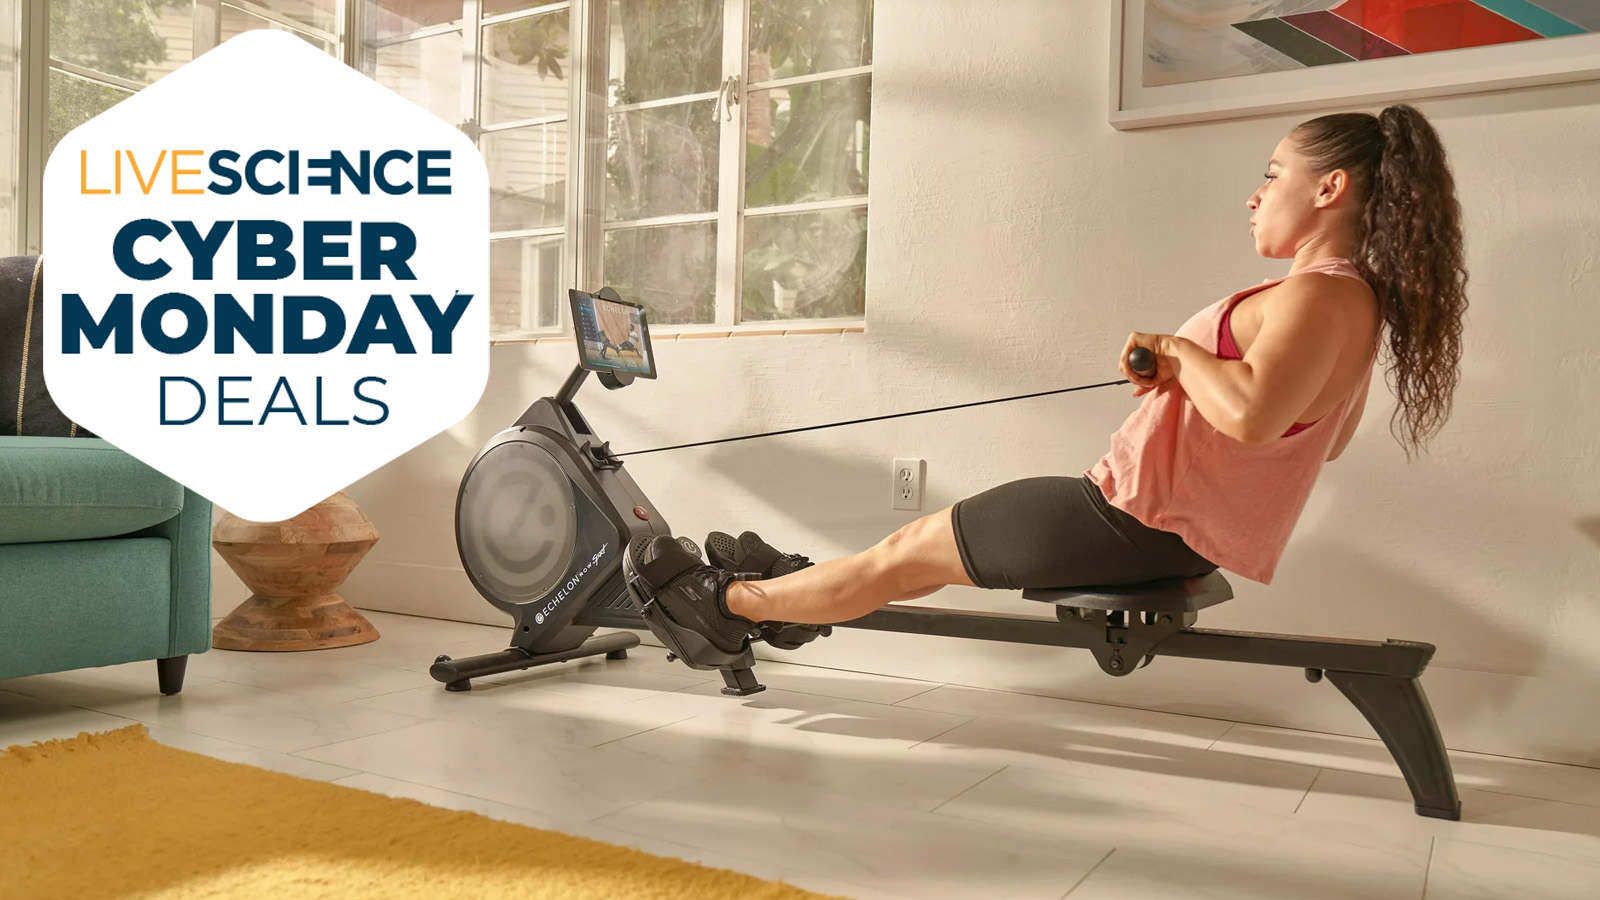 Don't miss the chance to save $300 on this Echelon Sport Rower for Cyber Monday